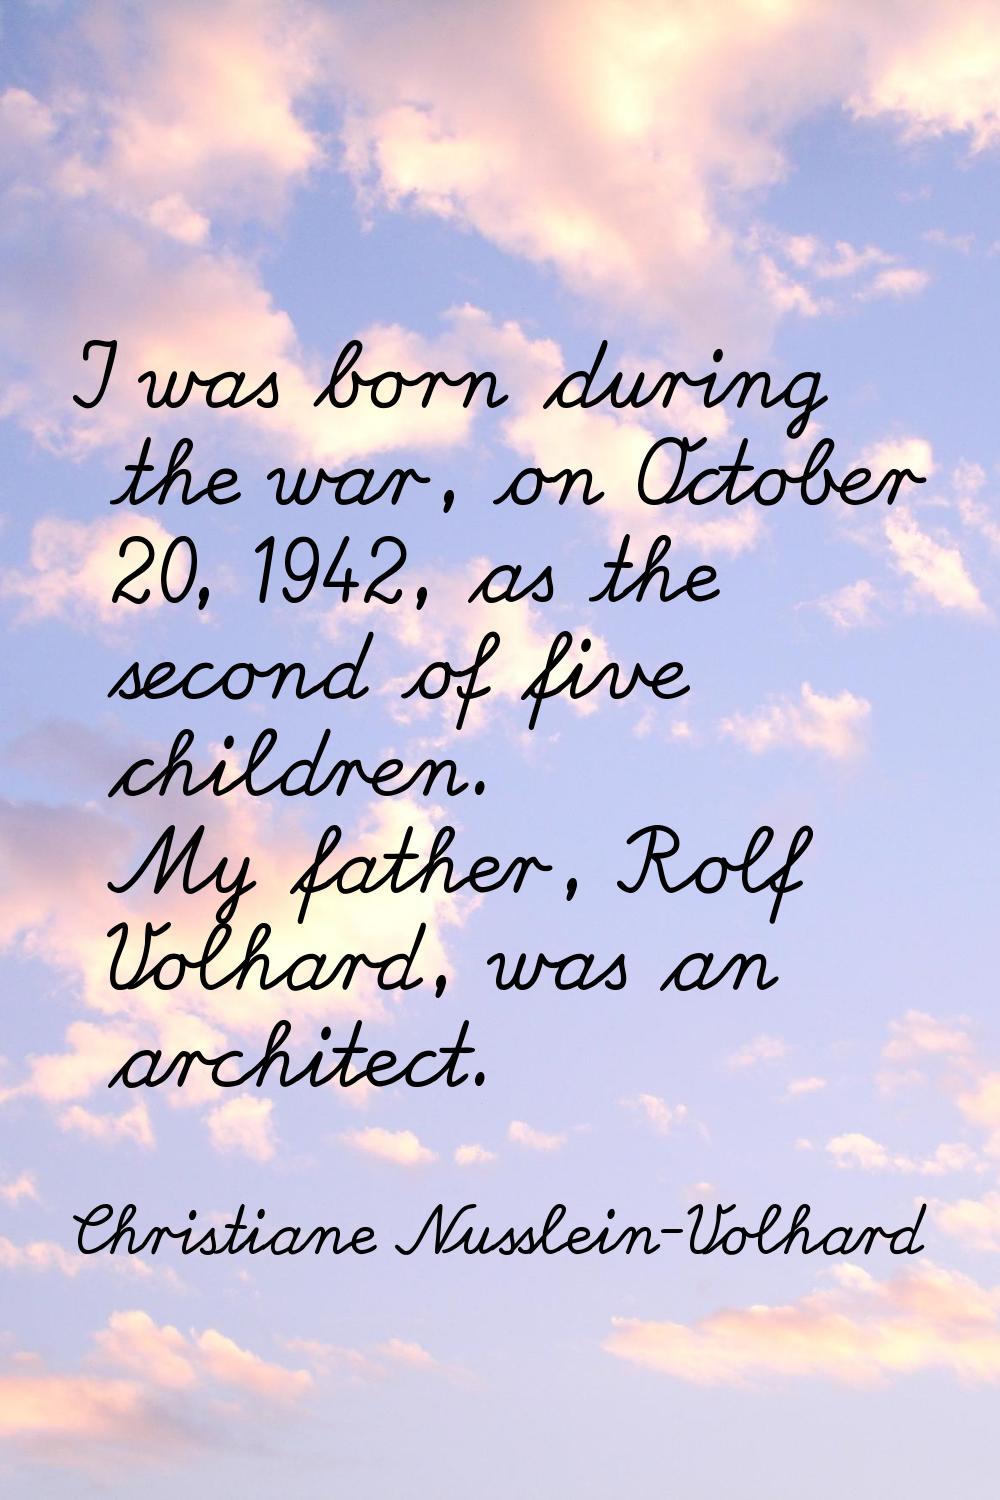 I was born during the war, on October 20, 1942, as the second of five children. My father, Rolf Vol